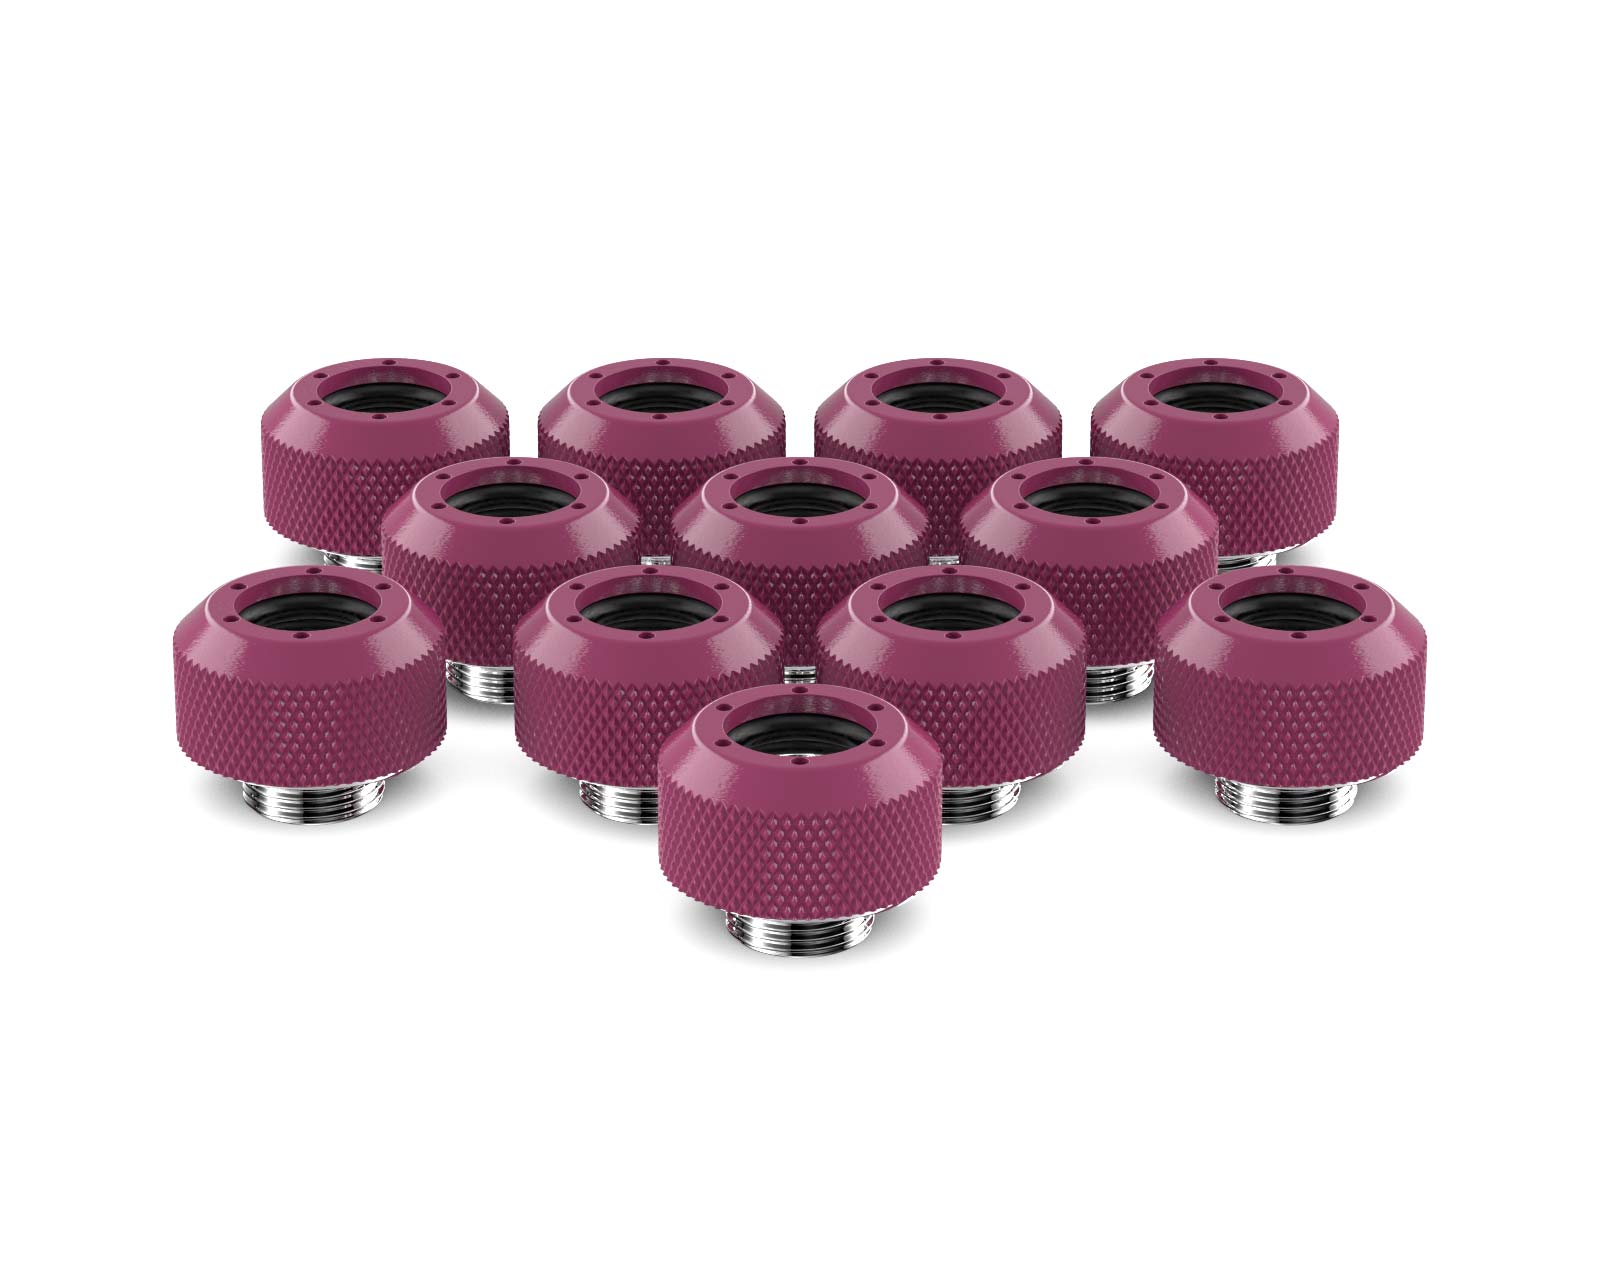 PrimoChill 1/2in. Rigid RevolverSX Series Fitting - 12 pack - PrimoChill - KEEPING IT COOL Magenta